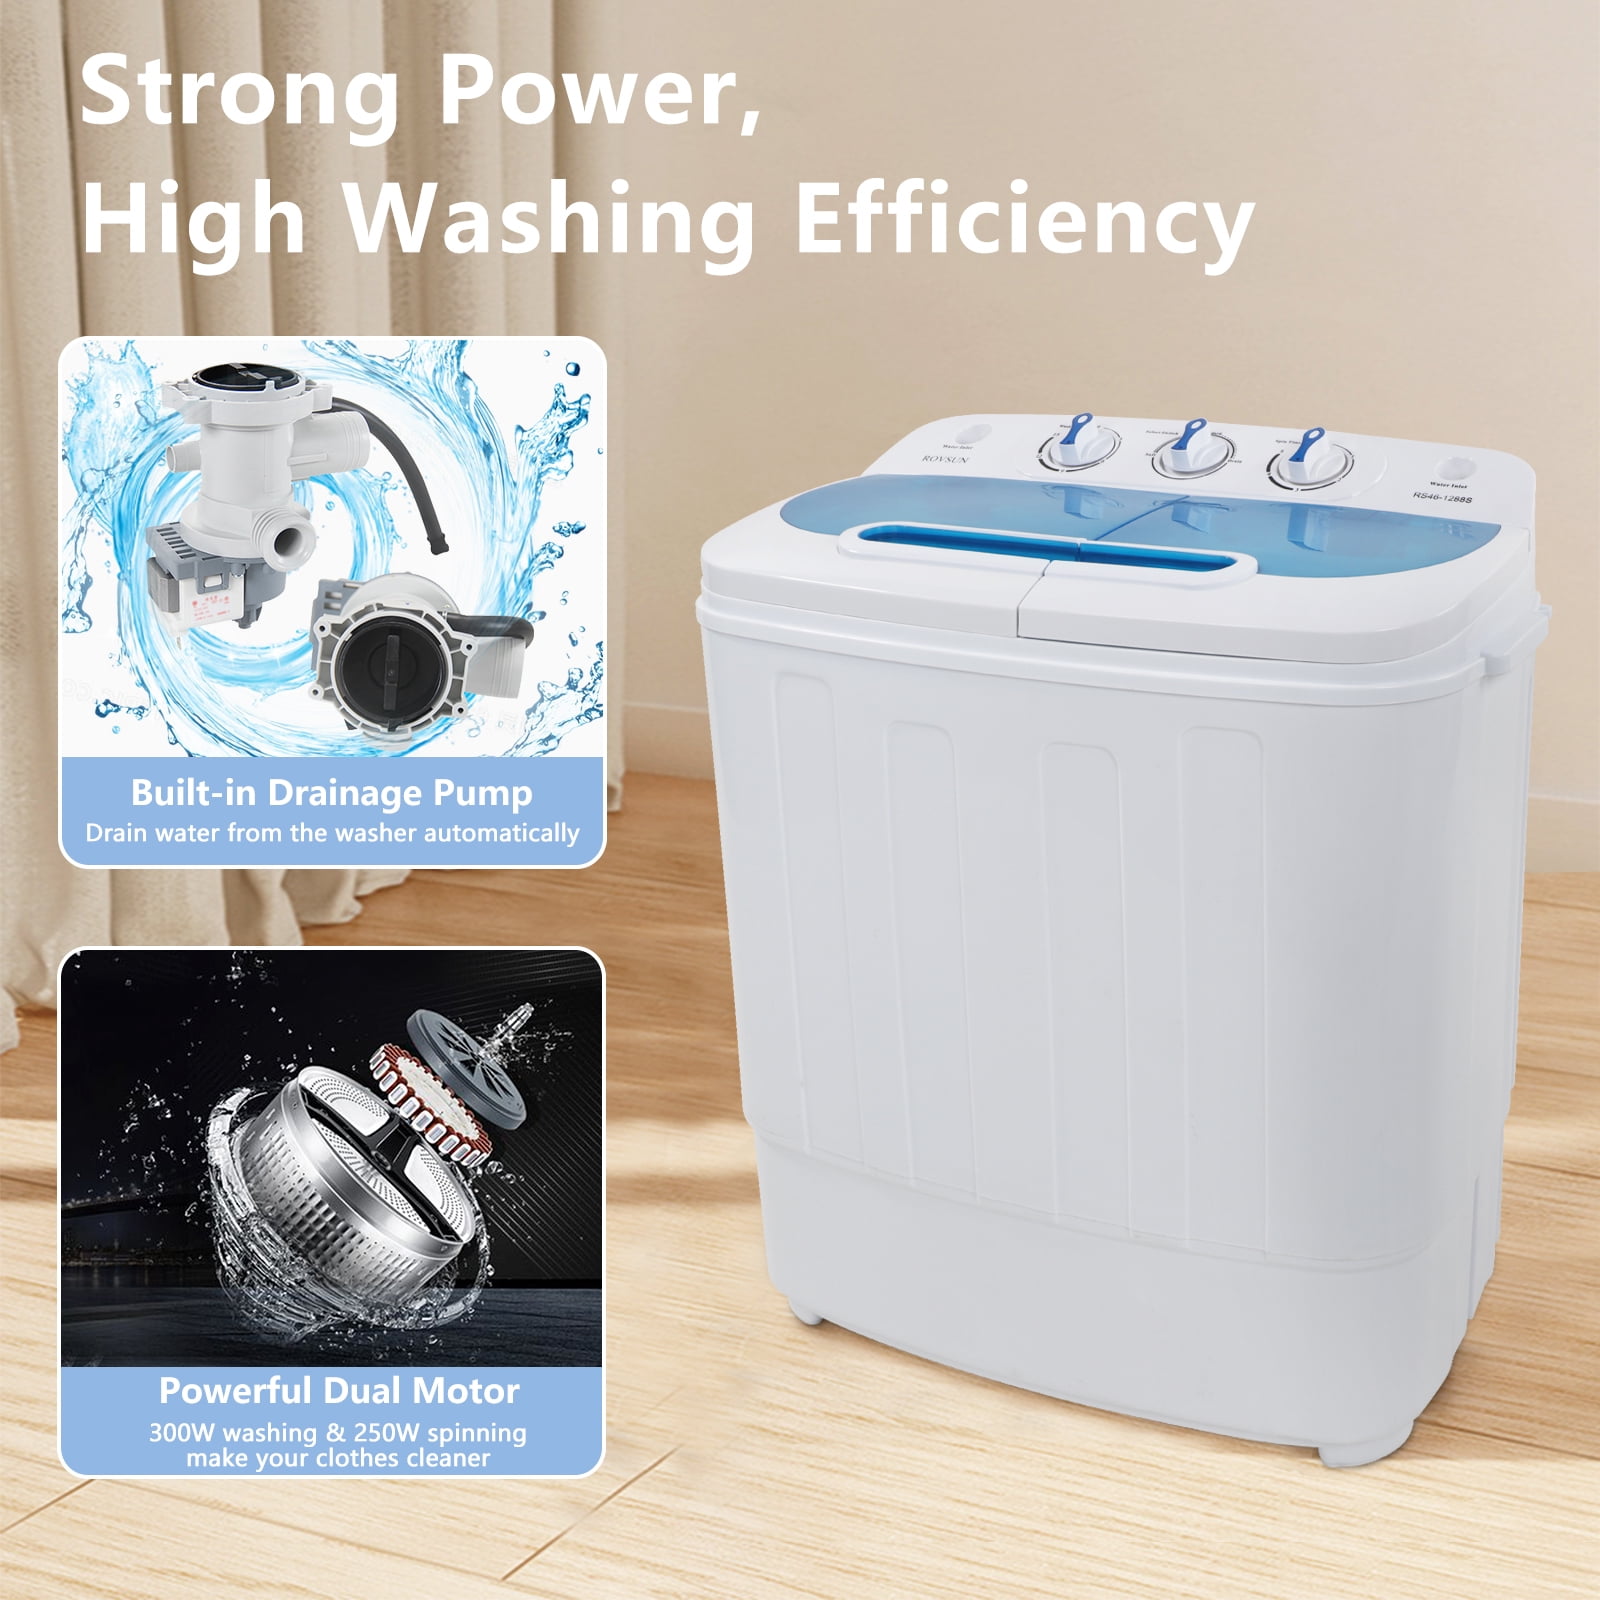 15LBS Portable Washing Machine, Compact Mini Washer Machine & Dryer Combo,  Built-In Gravity Drain, Small Twin Tub Washer With Spin Cycle For Laundry  Room, Apartments, Dorms, RV's (Grey)